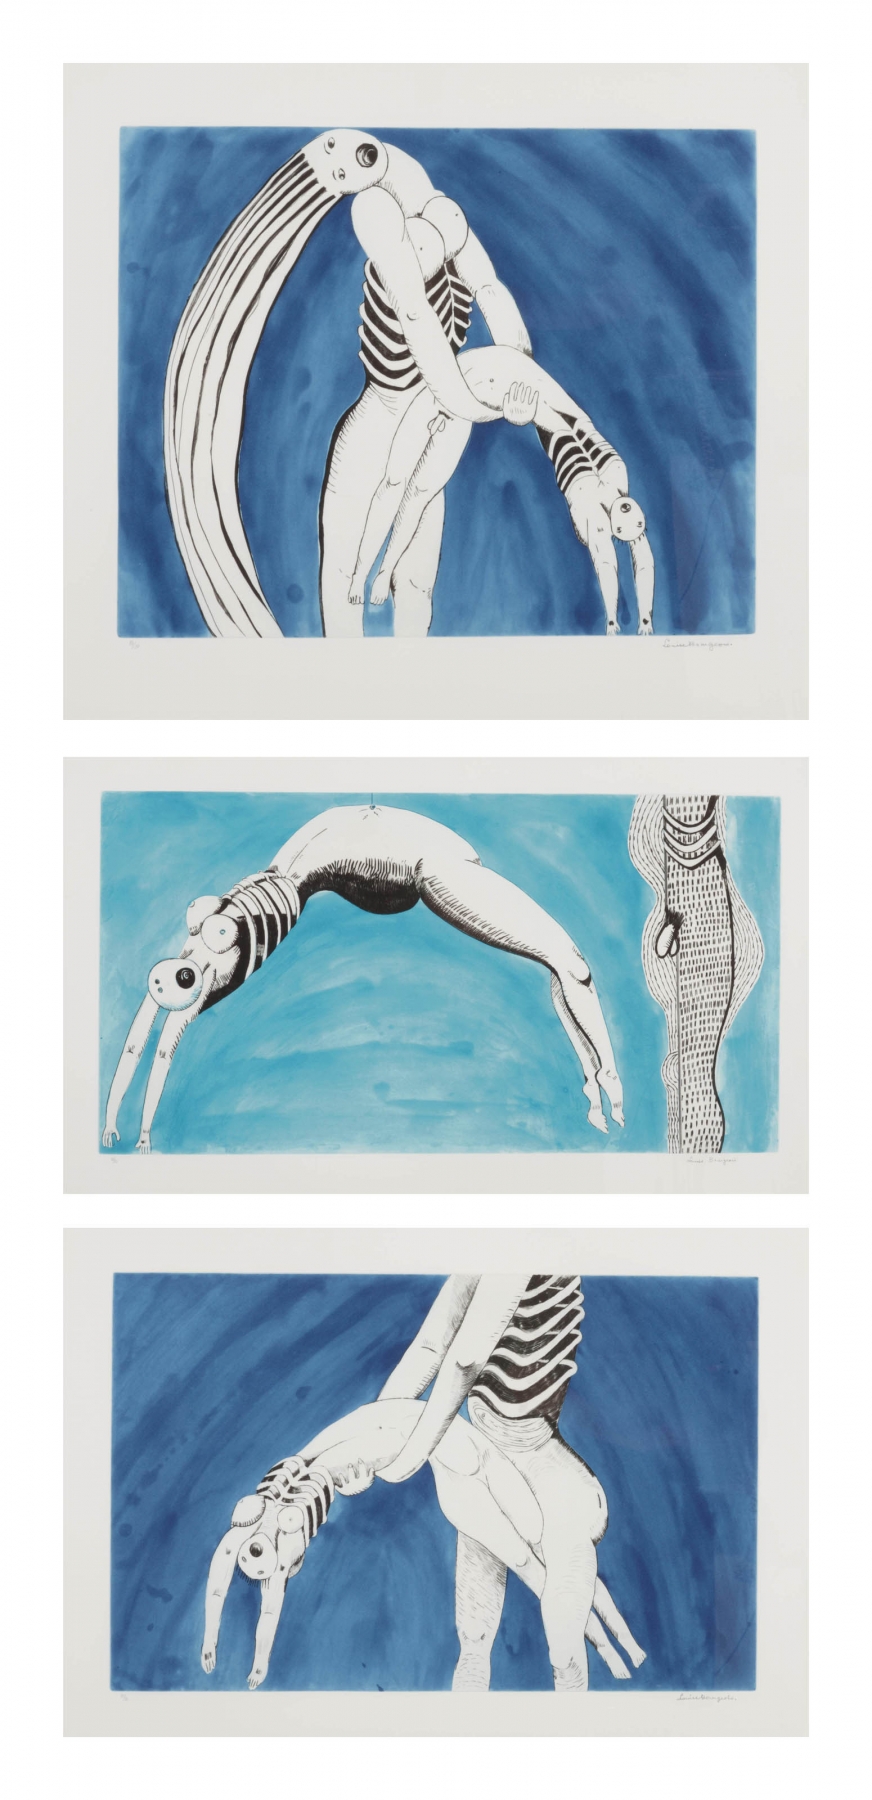 Triptych for the Red Room, 1994
3 aquatints, drypoints, and engravings
Sheet sizes vary
Edition of 30 + proofs

Inquire
&nbsp;